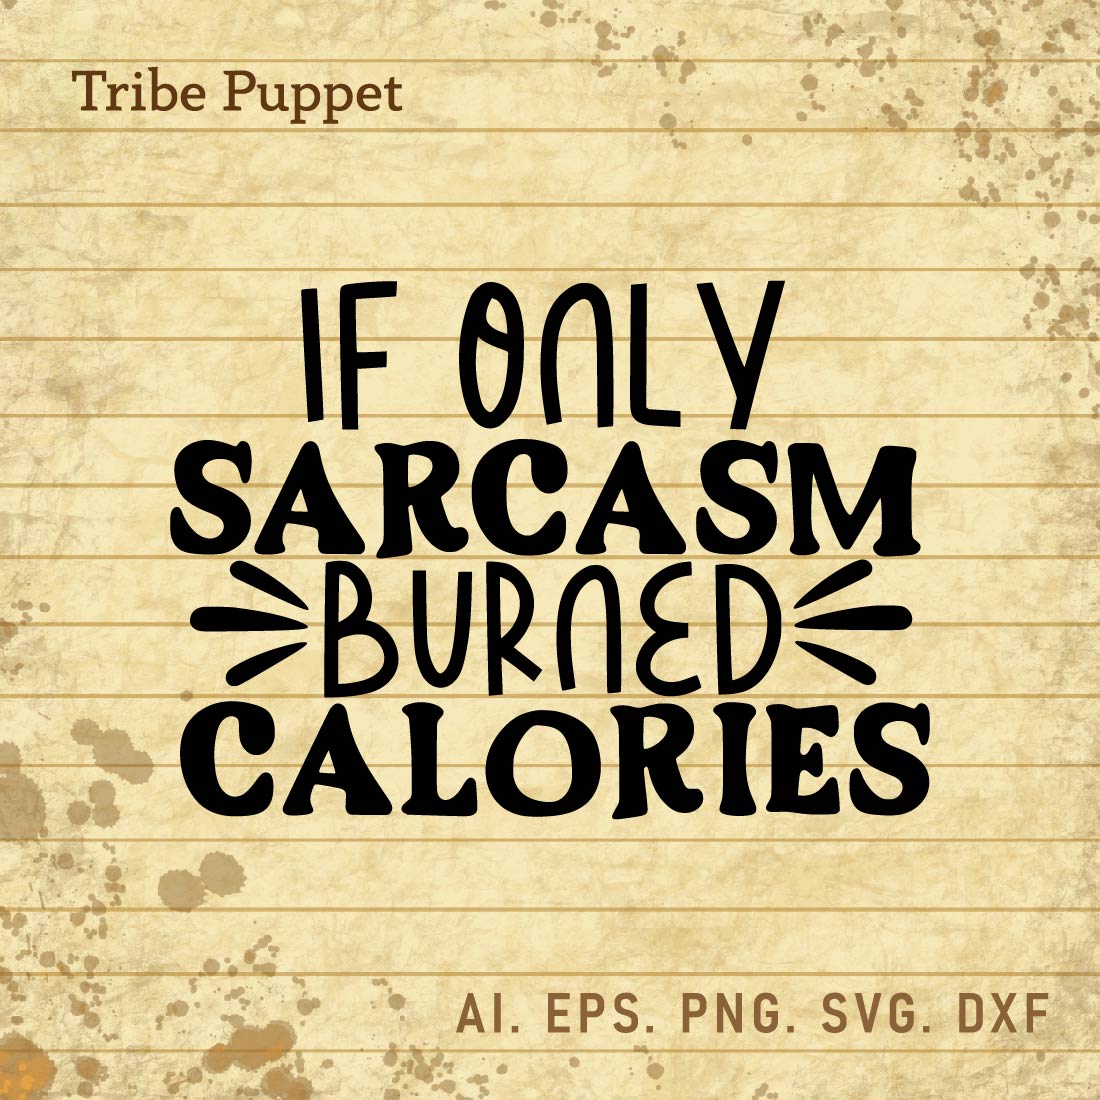 Sarcastic Quotes cover image.